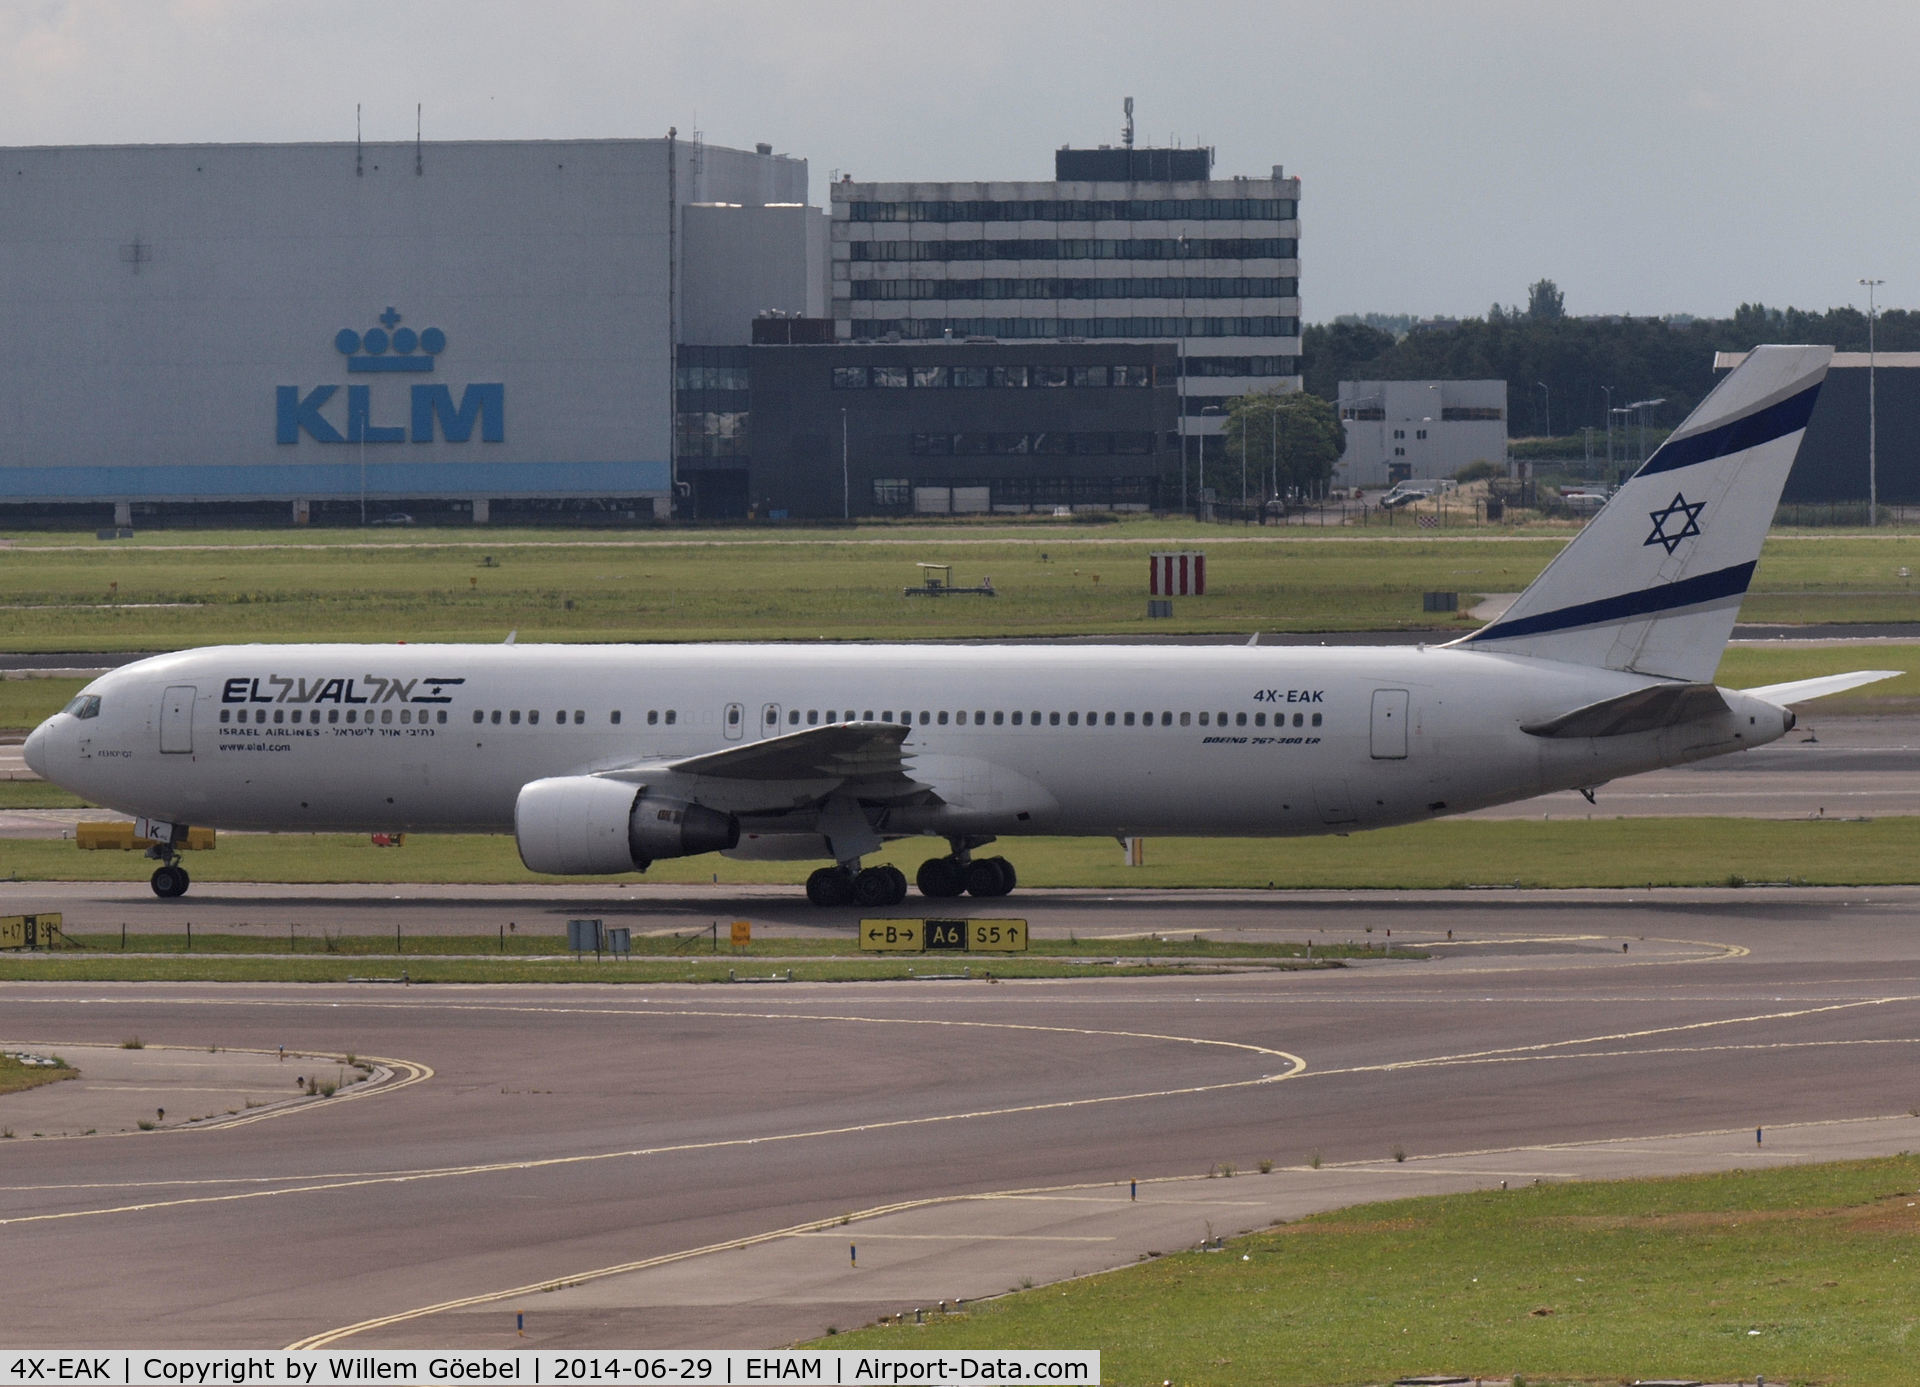 4X-EAK, 1997 Boeing 767-3Q8 C/N 27600, Taxi to the gate of Schiphol Airport